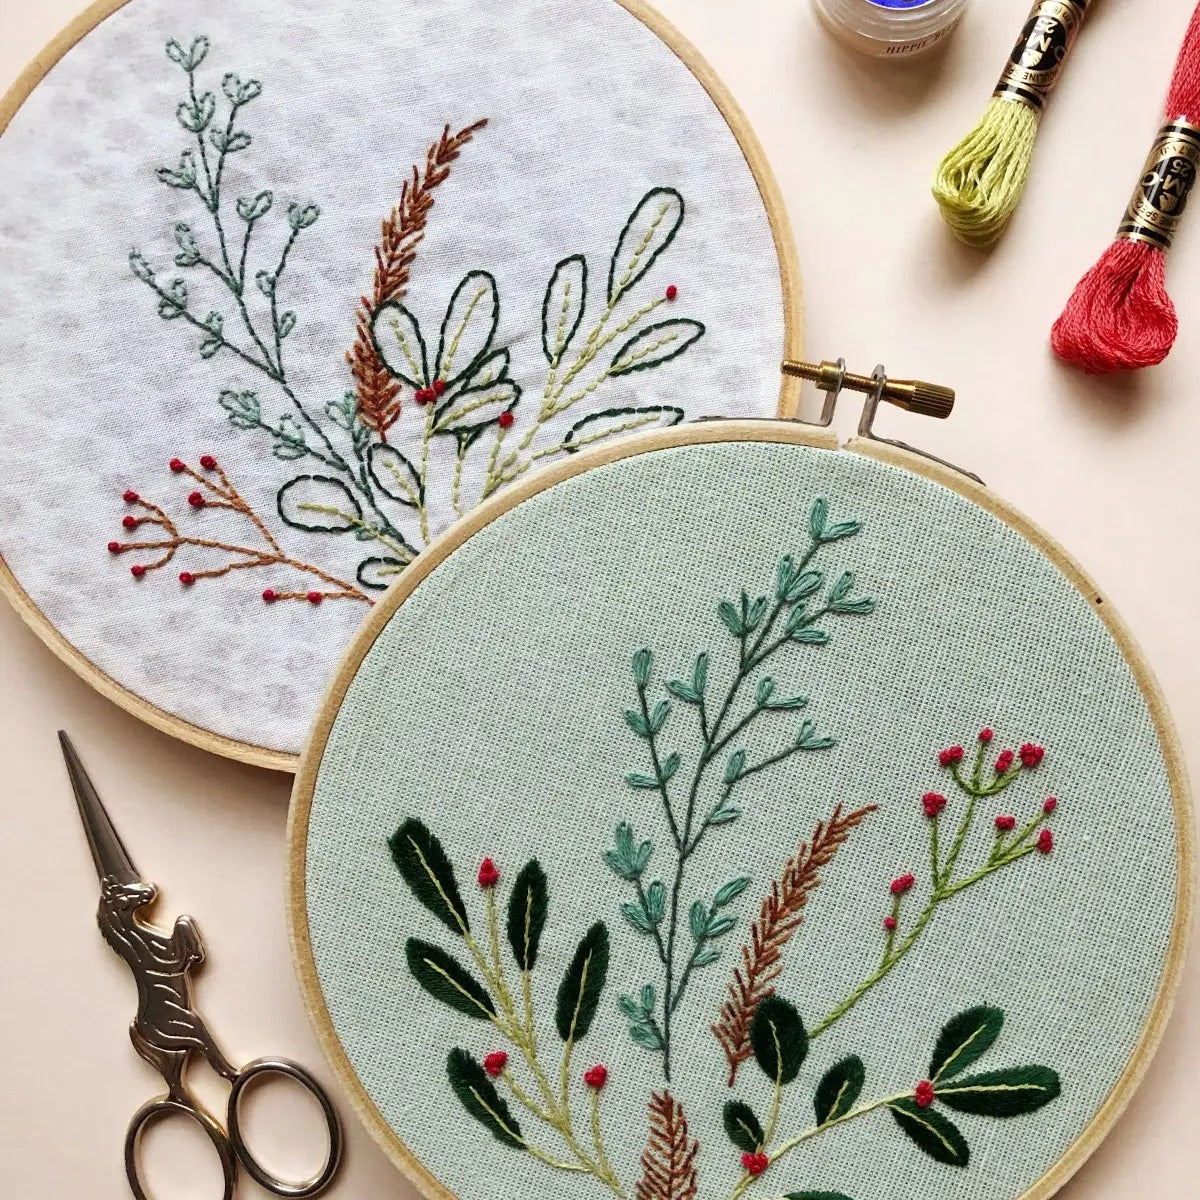 Floral Stick and Stitch Embroidery Designs, Floral Embroidery